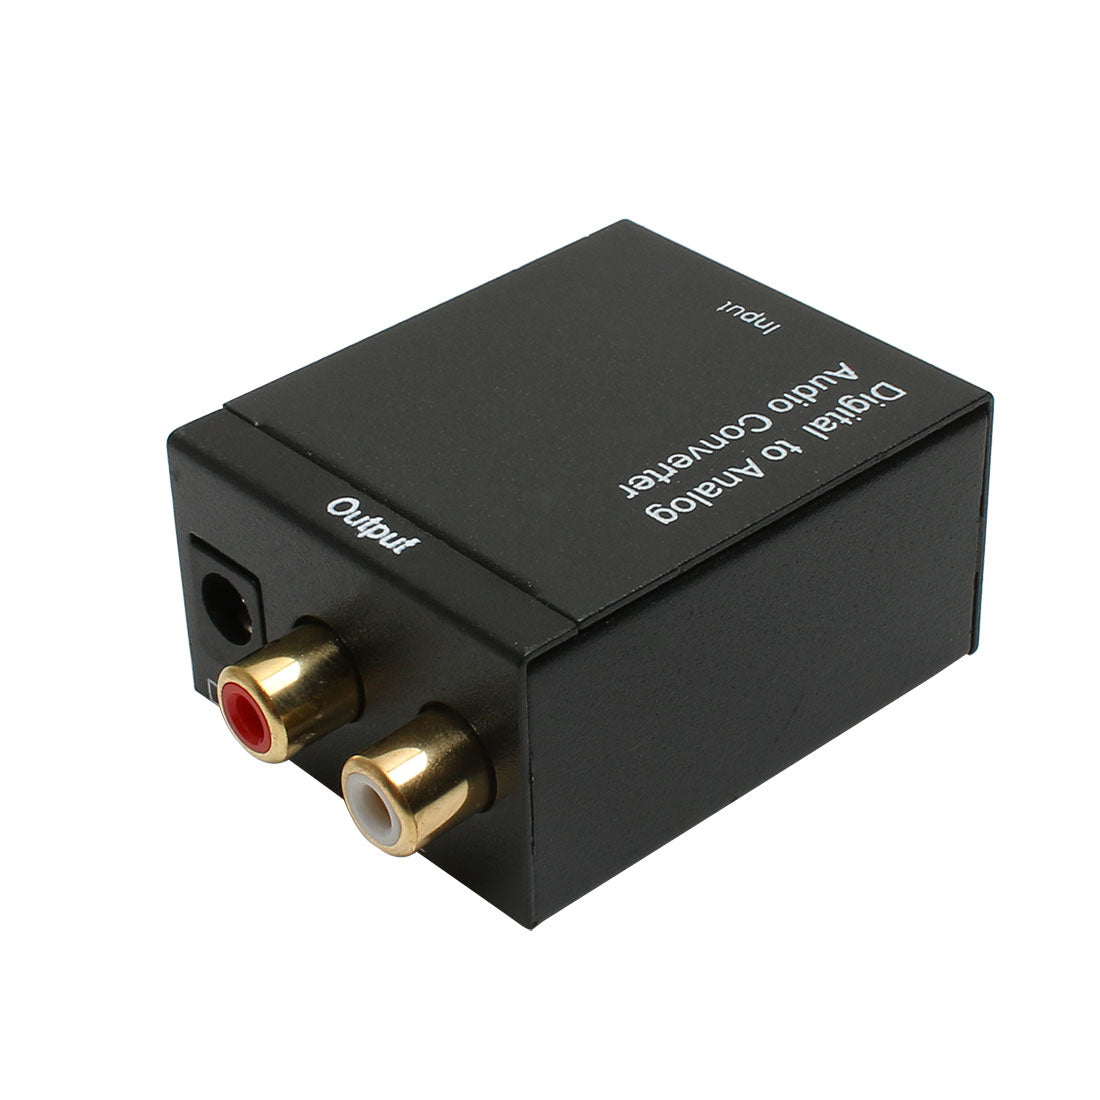 will a 1 to 3 optical audio splitter also work in reverse